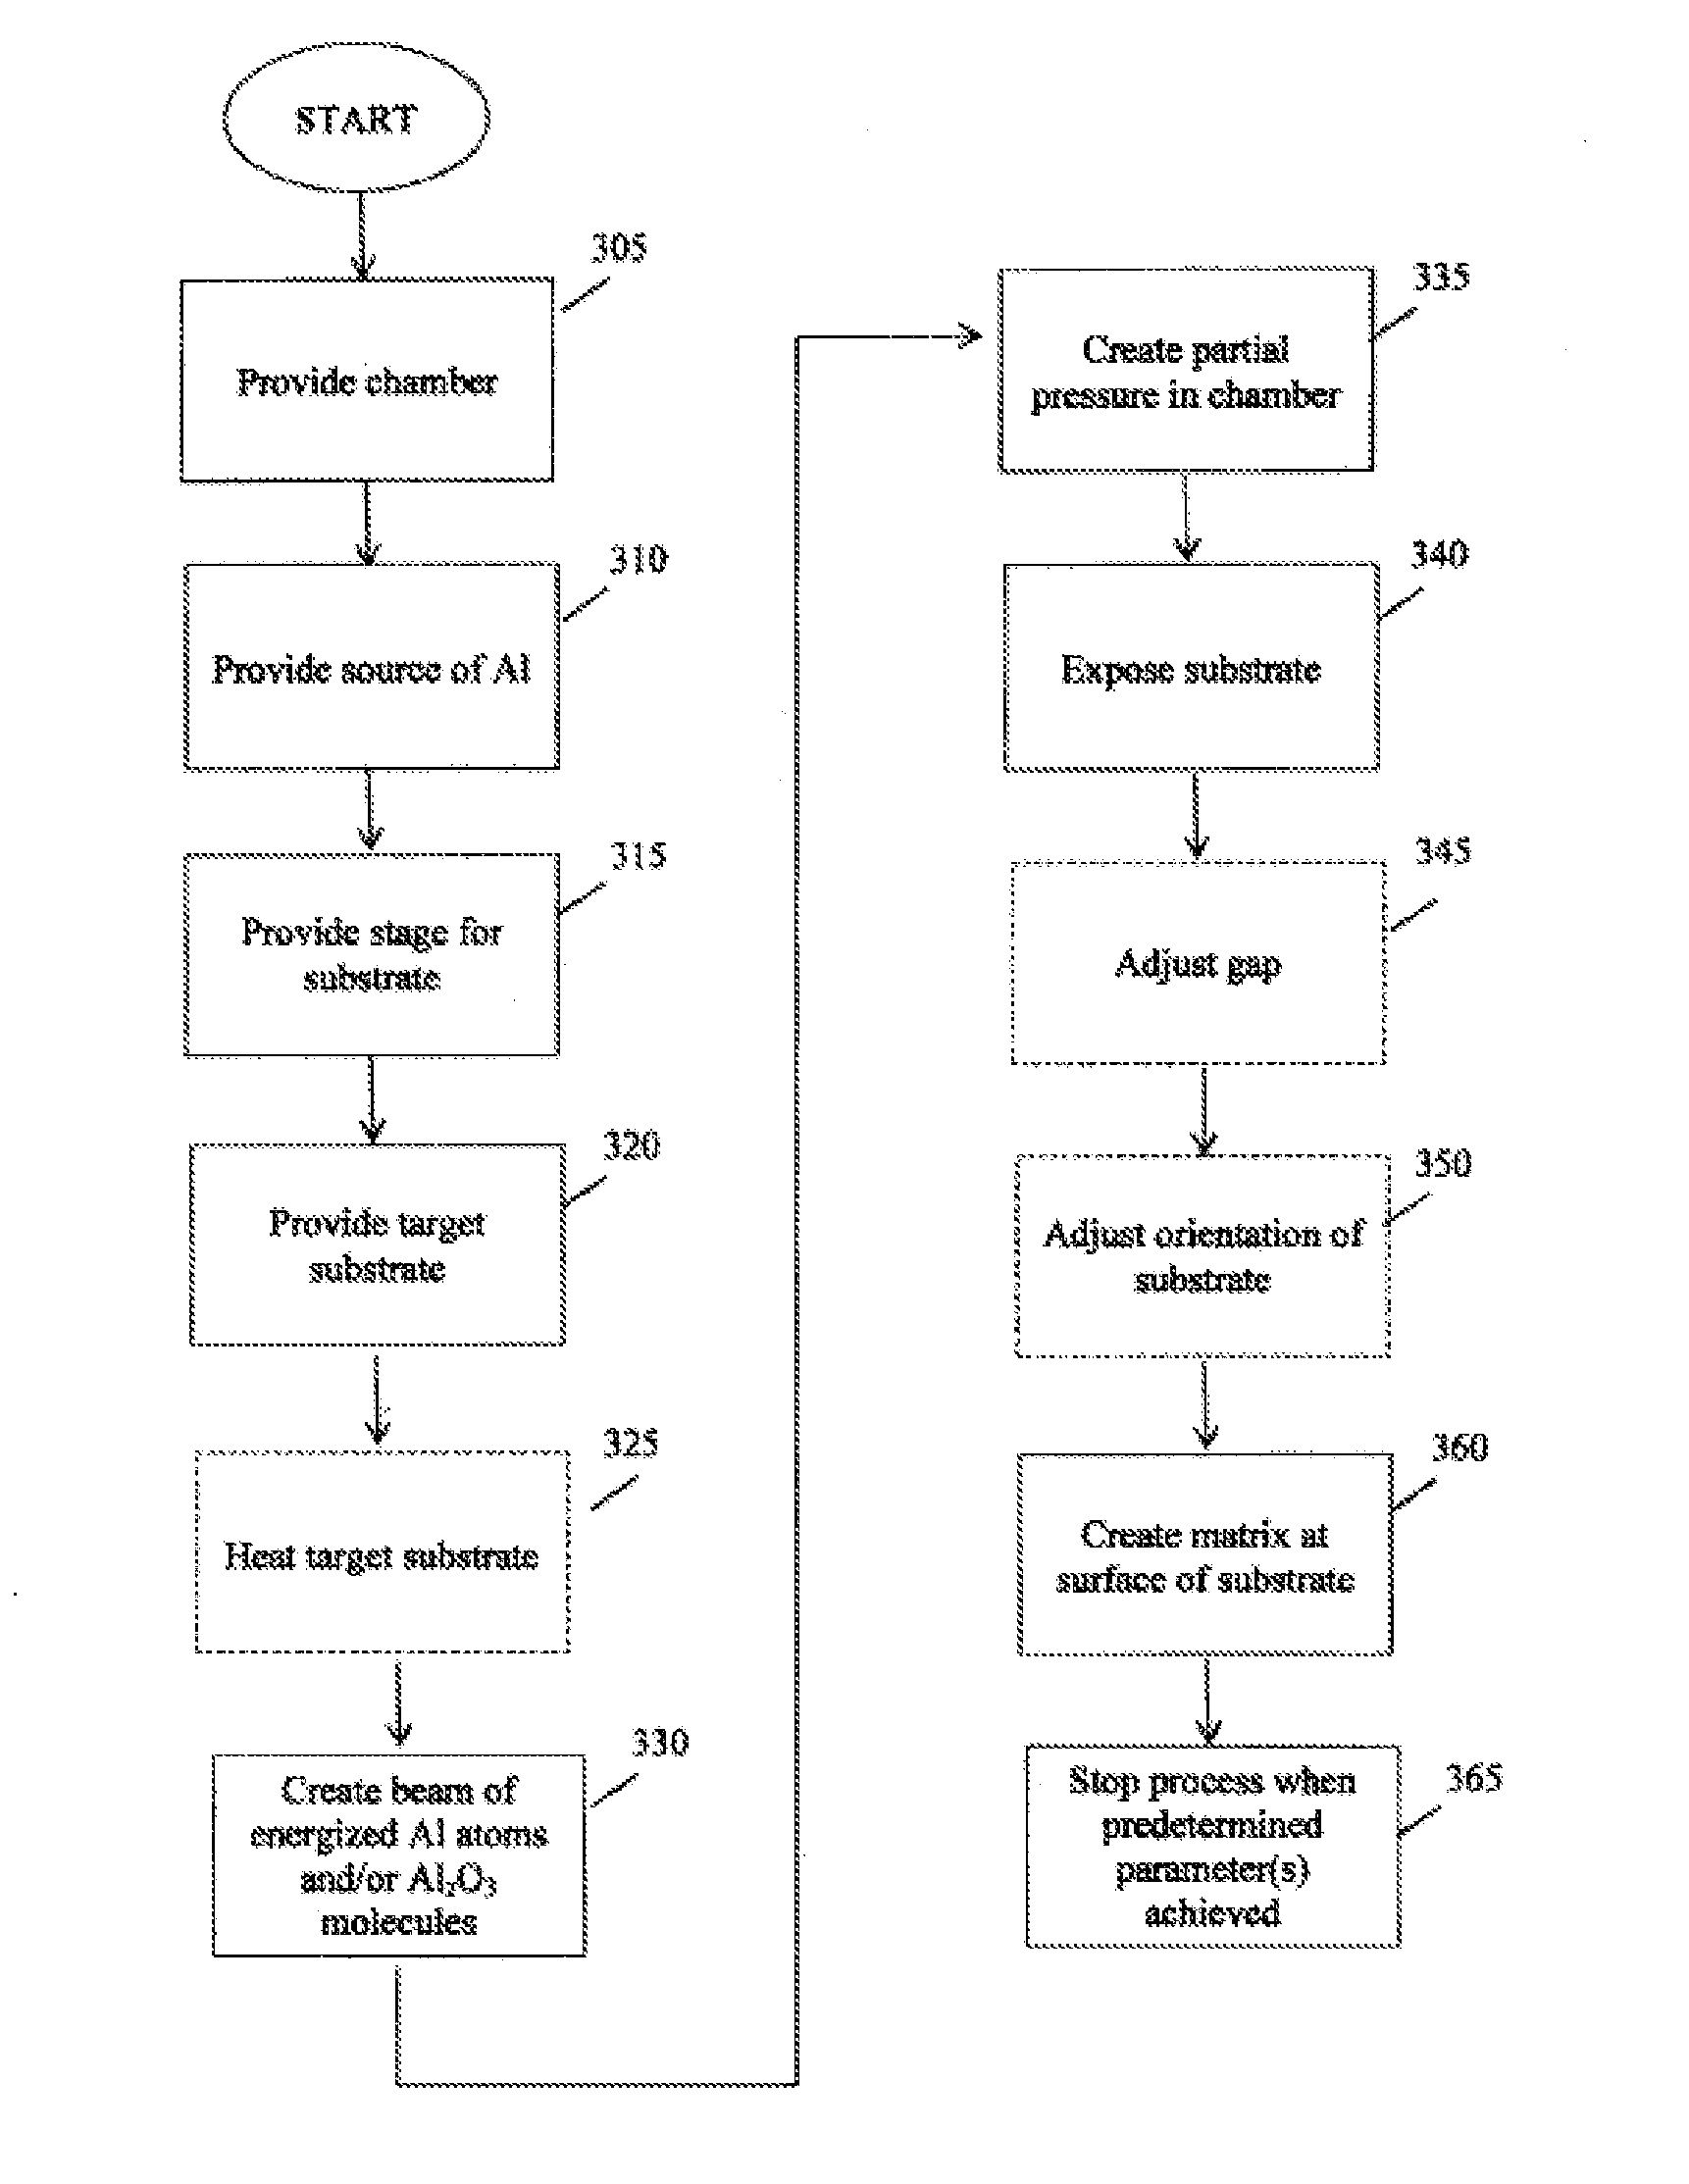 Method of growing aluminum oxide onto substrates by use of an aluminum source in an environment containing partial pressure of oxygen to create transparent, scratch-resistant windows